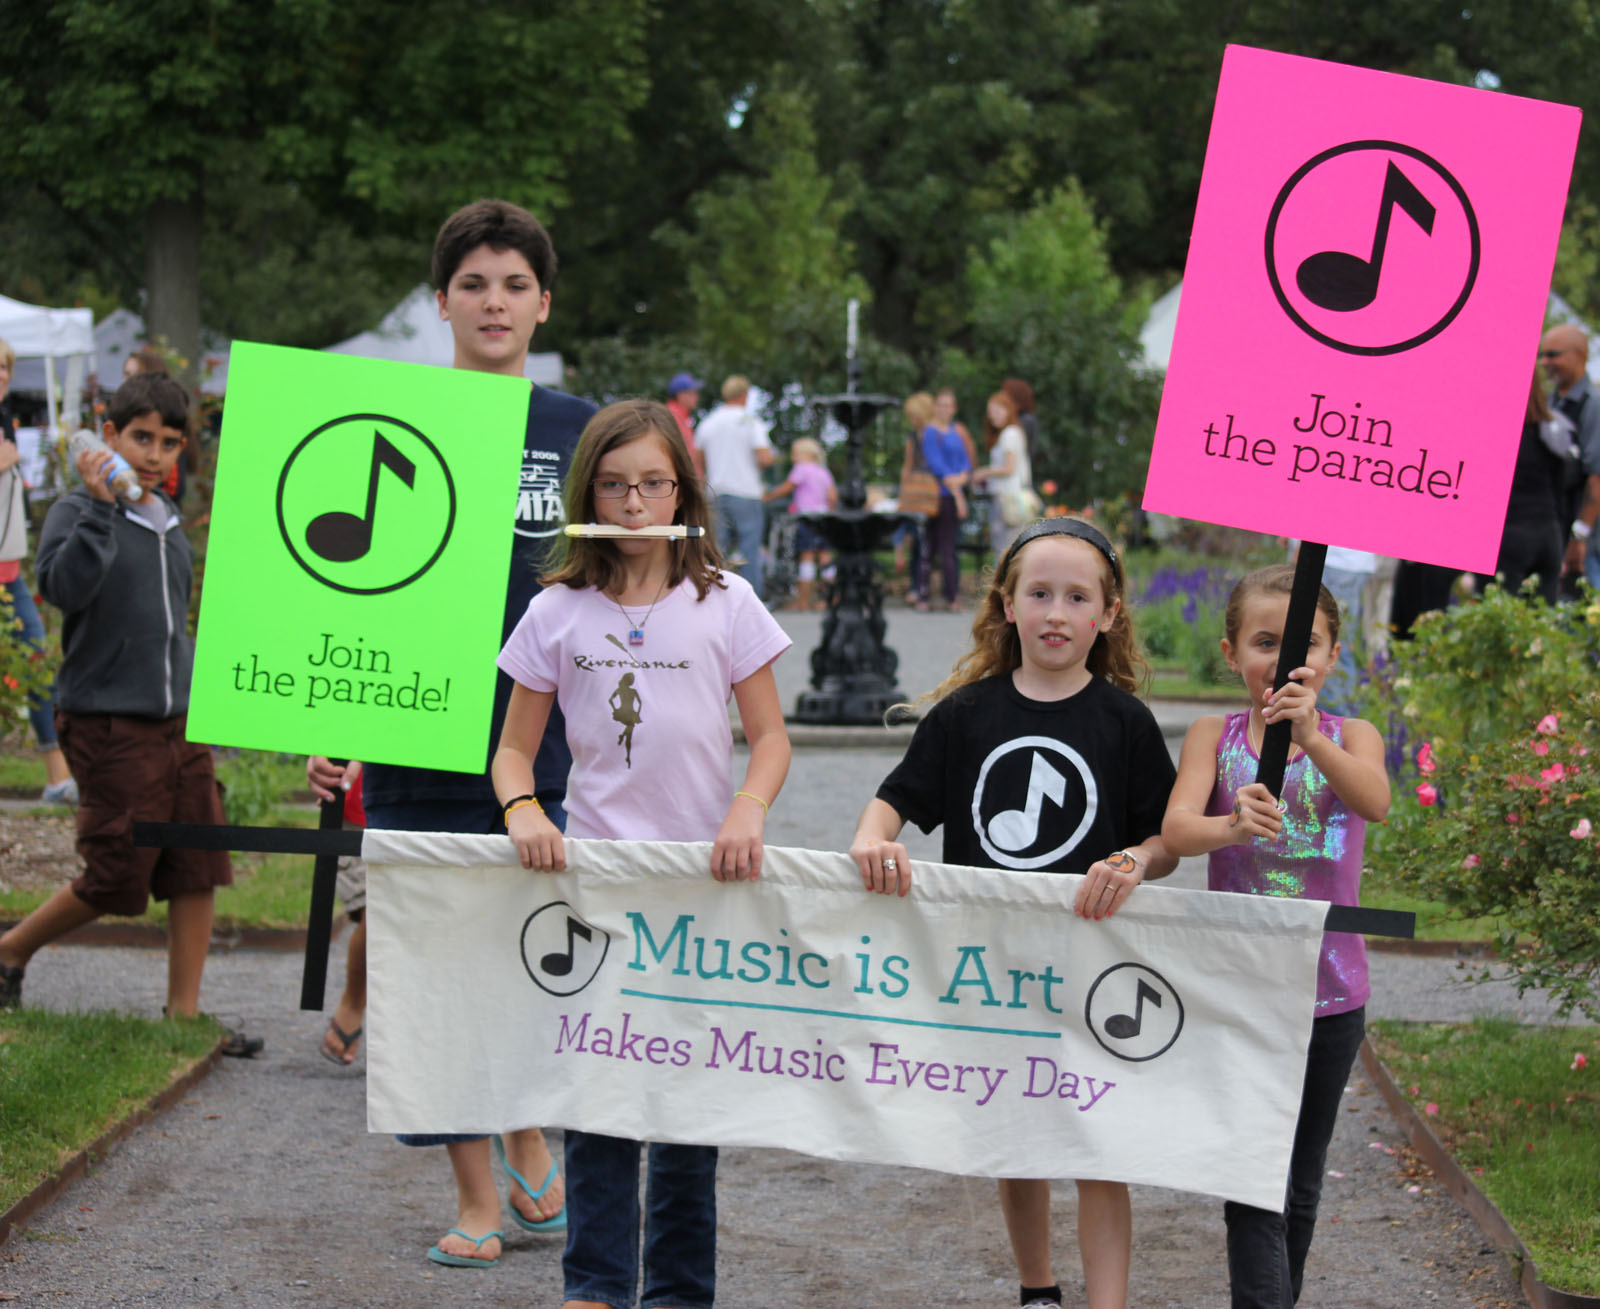 Community members hold a banner saying "Music is Art" with the subtext "Makes music every day". Students flanking the banner hold sings with the text "Join the parade"